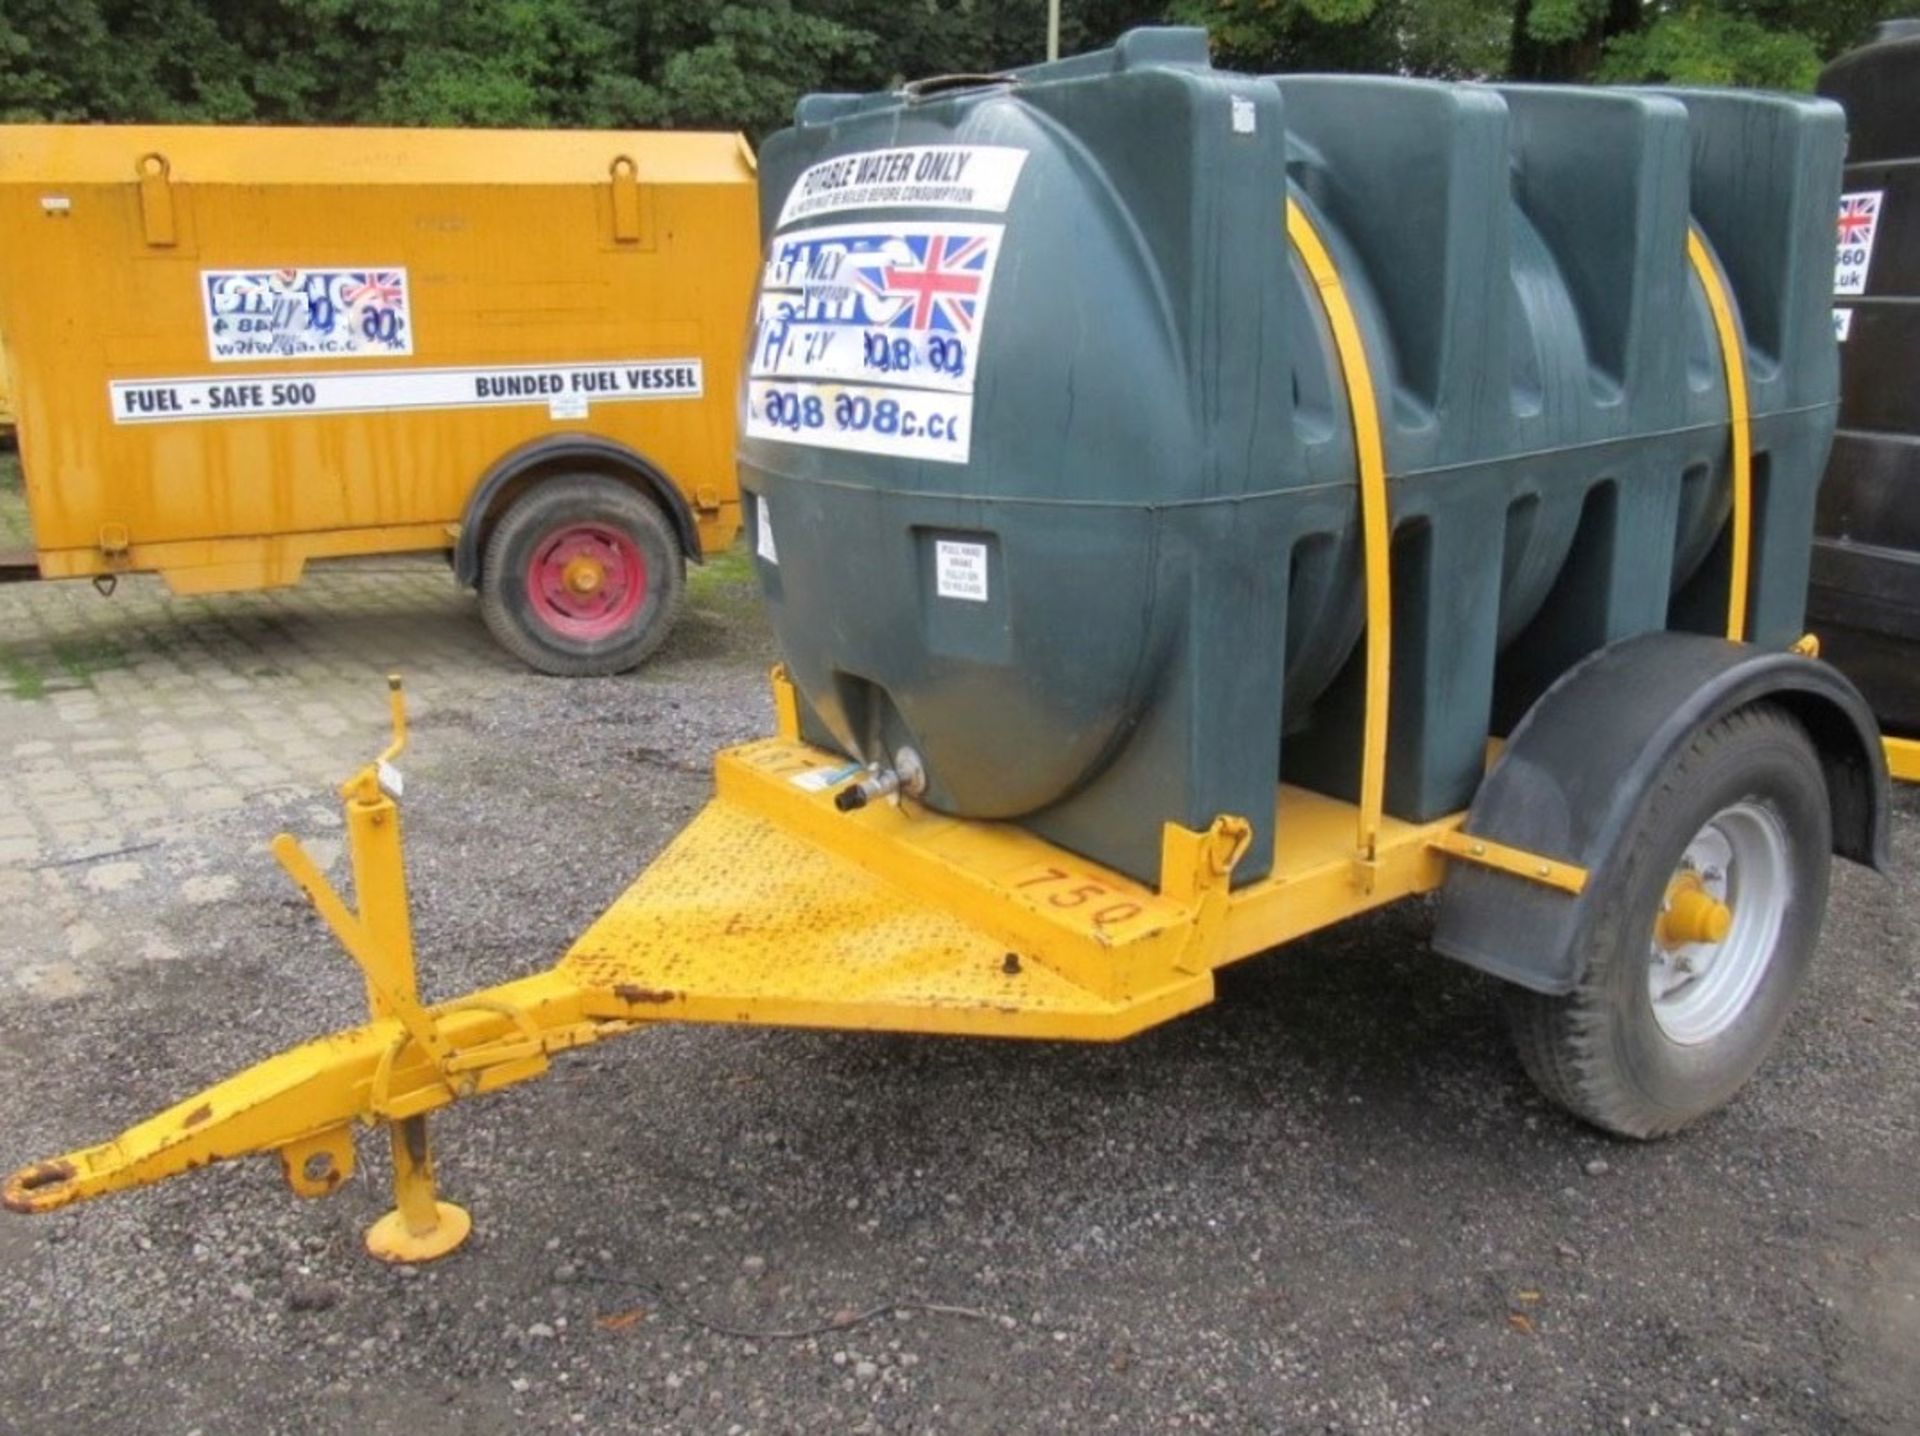 500 Gallon Towable Water Bowser Trailer - Image 3 of 3